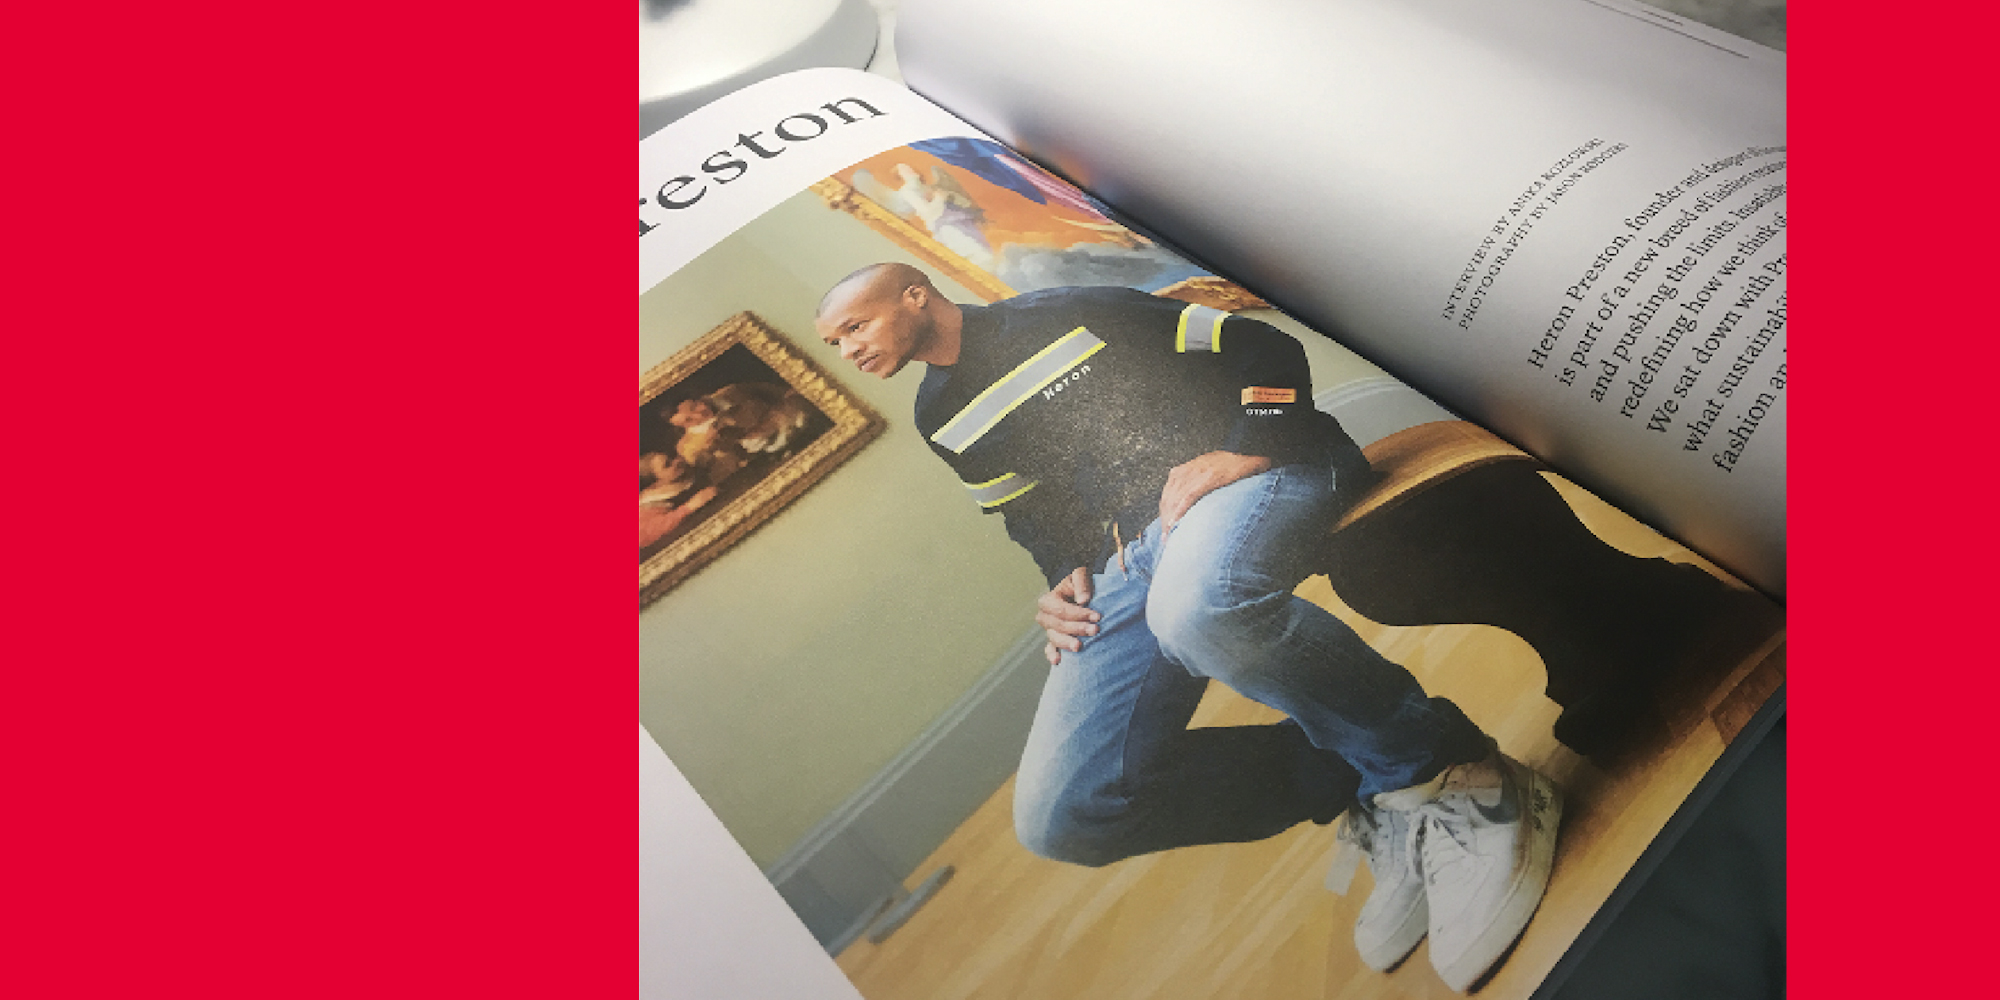 Heron Preston image in the second issue of greatest magazine. The interview was conducted by Fashion faculty, Anika Kozlowski touching on topics of sustainability